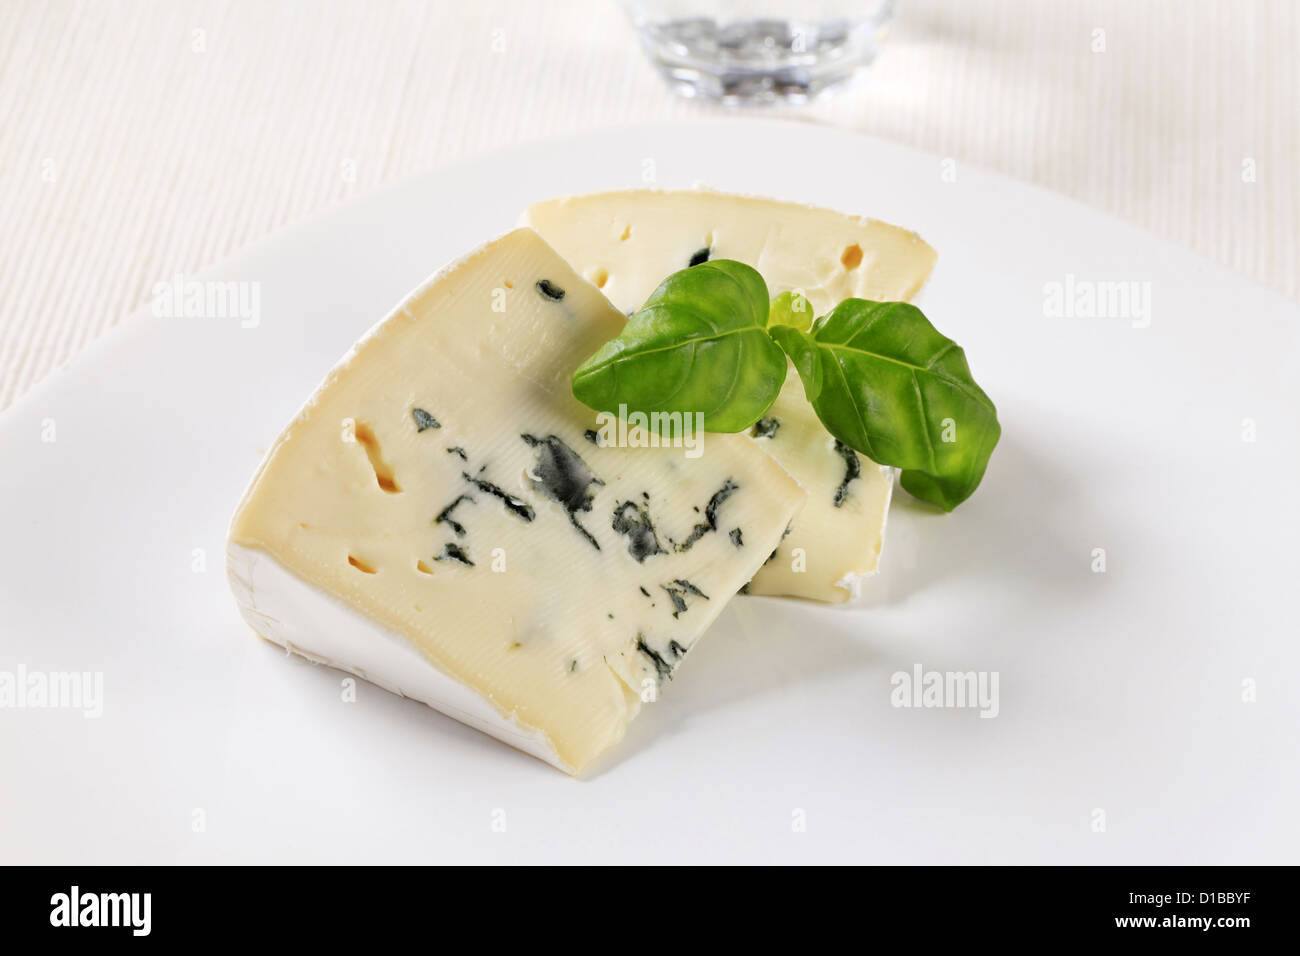 Wedges of blue cheese with white rind Stock Photo